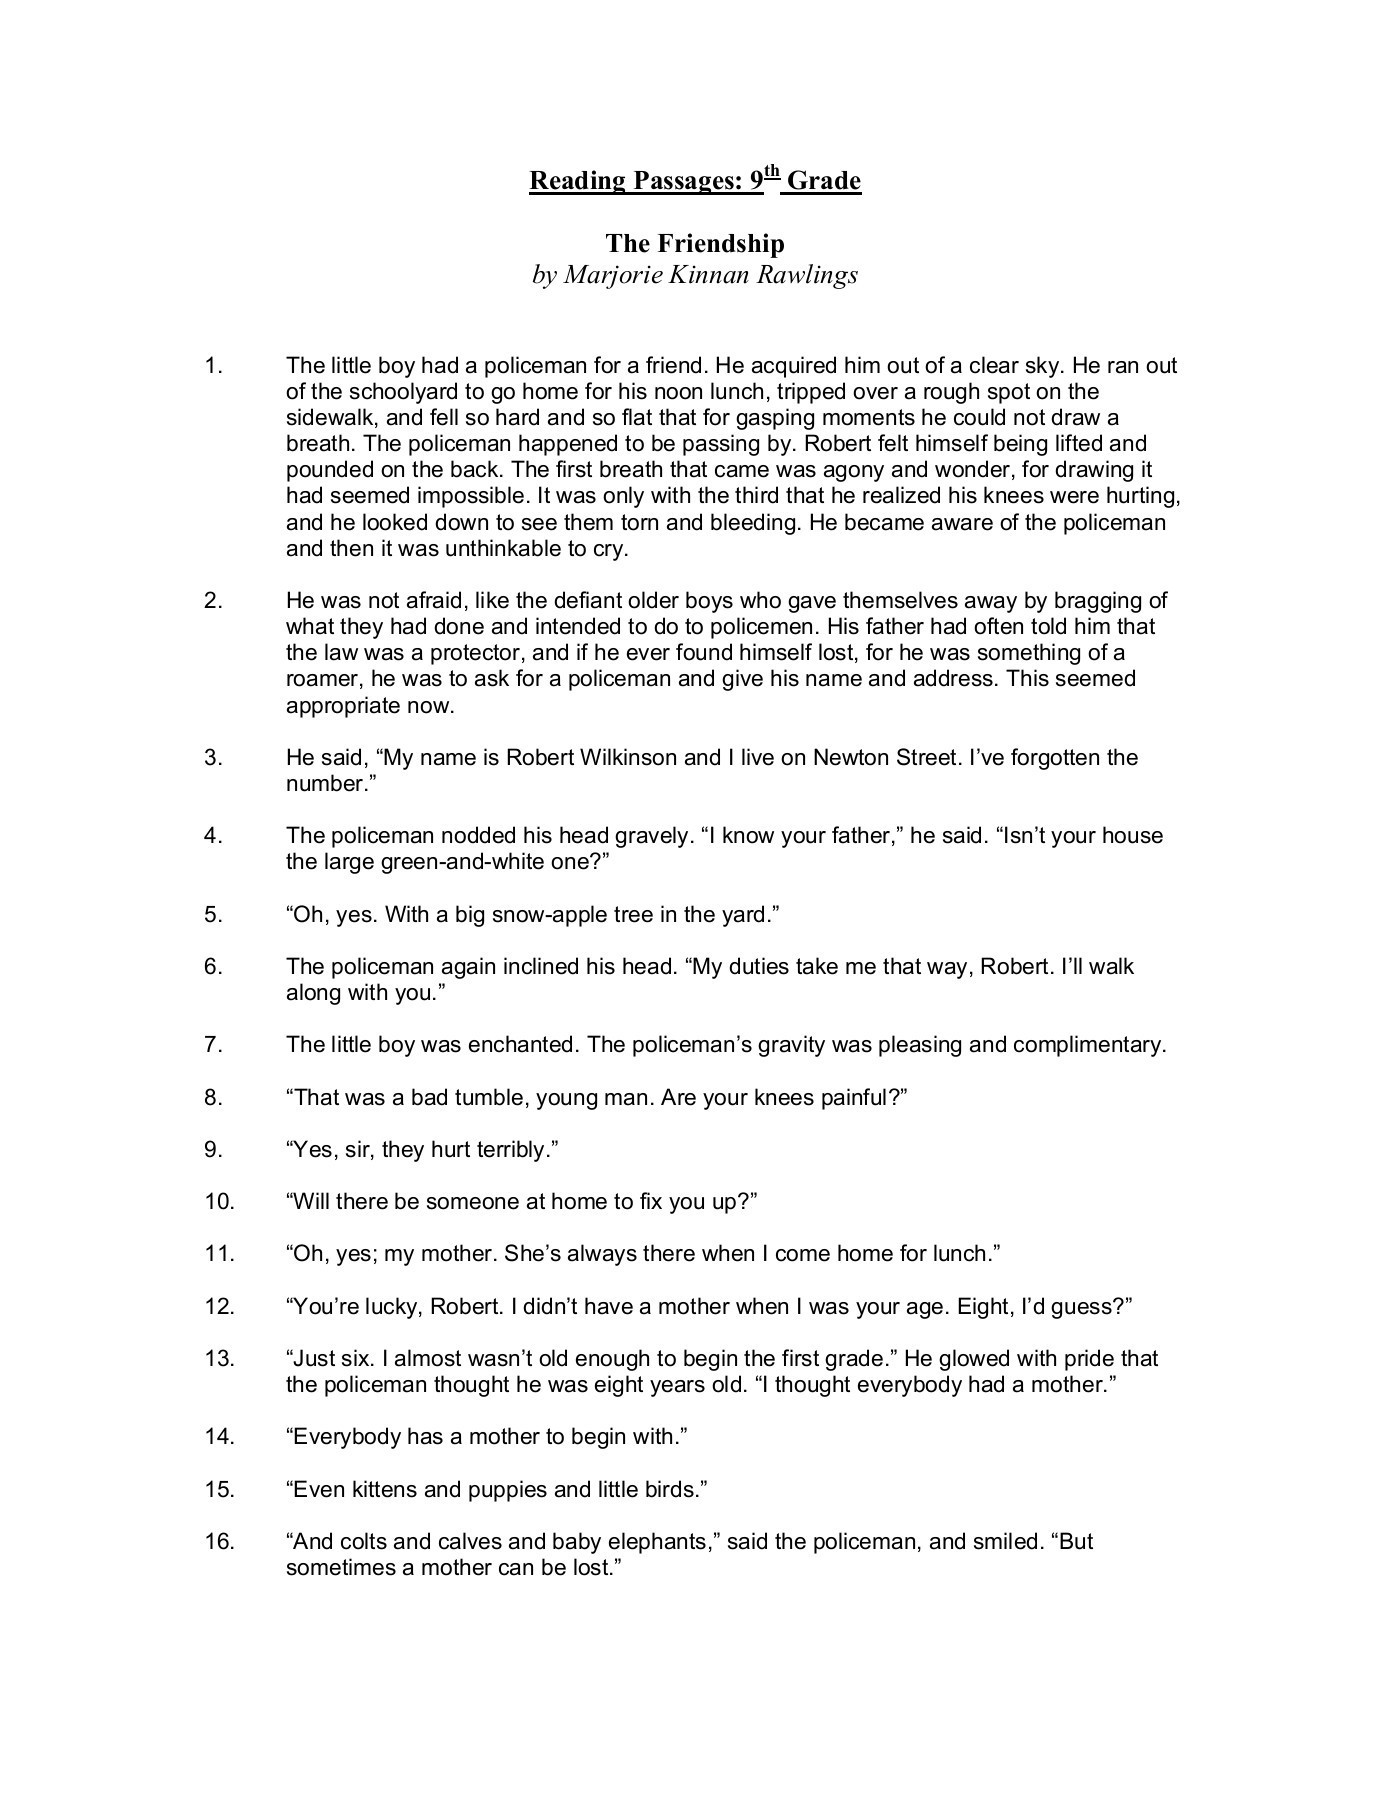 9th Grade Reading Comprehension Worksheet Reading Passages 9th Grade Dallas County Schools